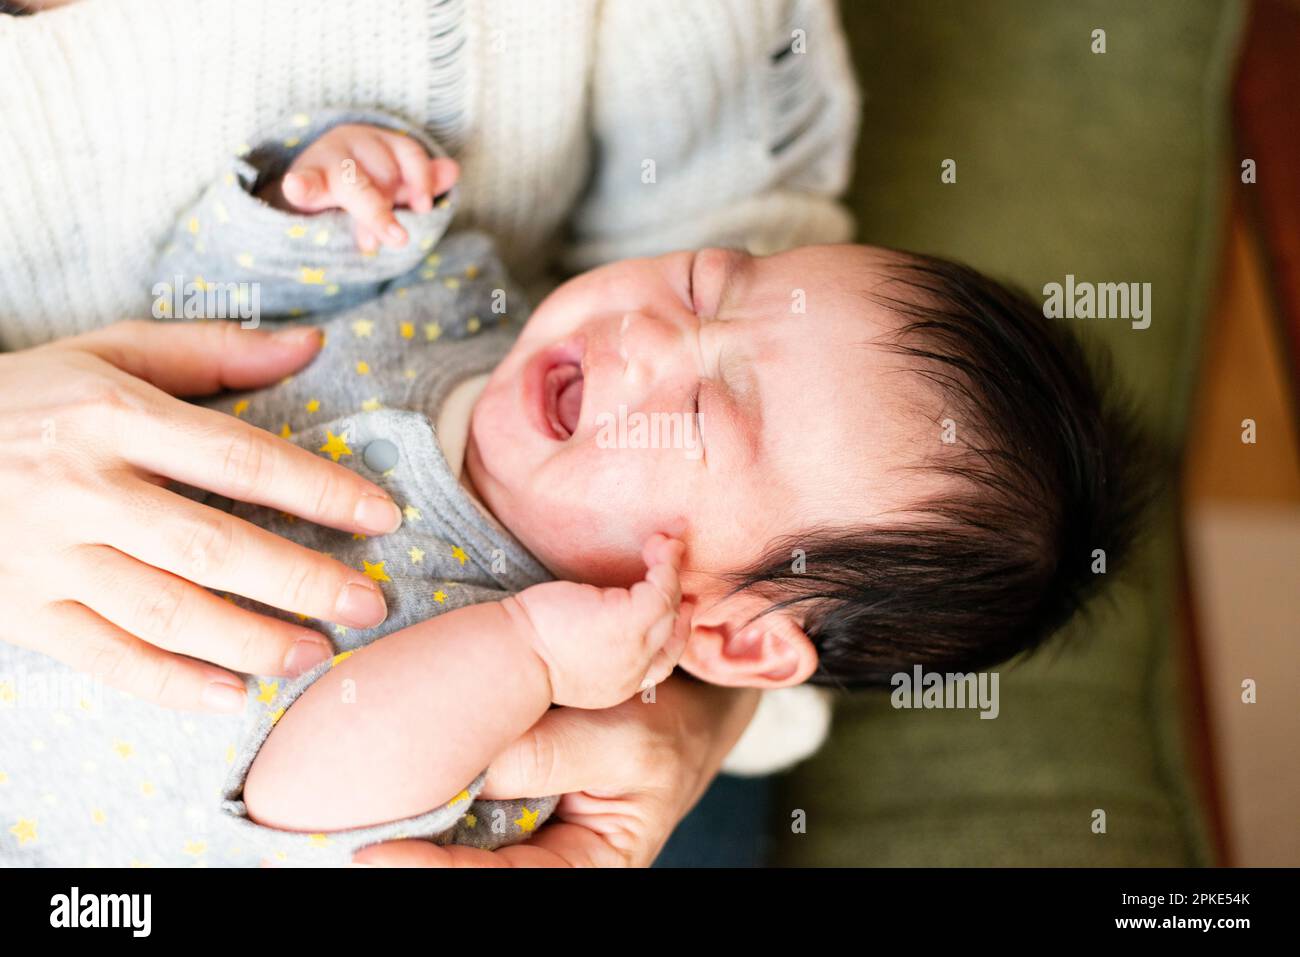 Baby crying while being carried Stock Photo